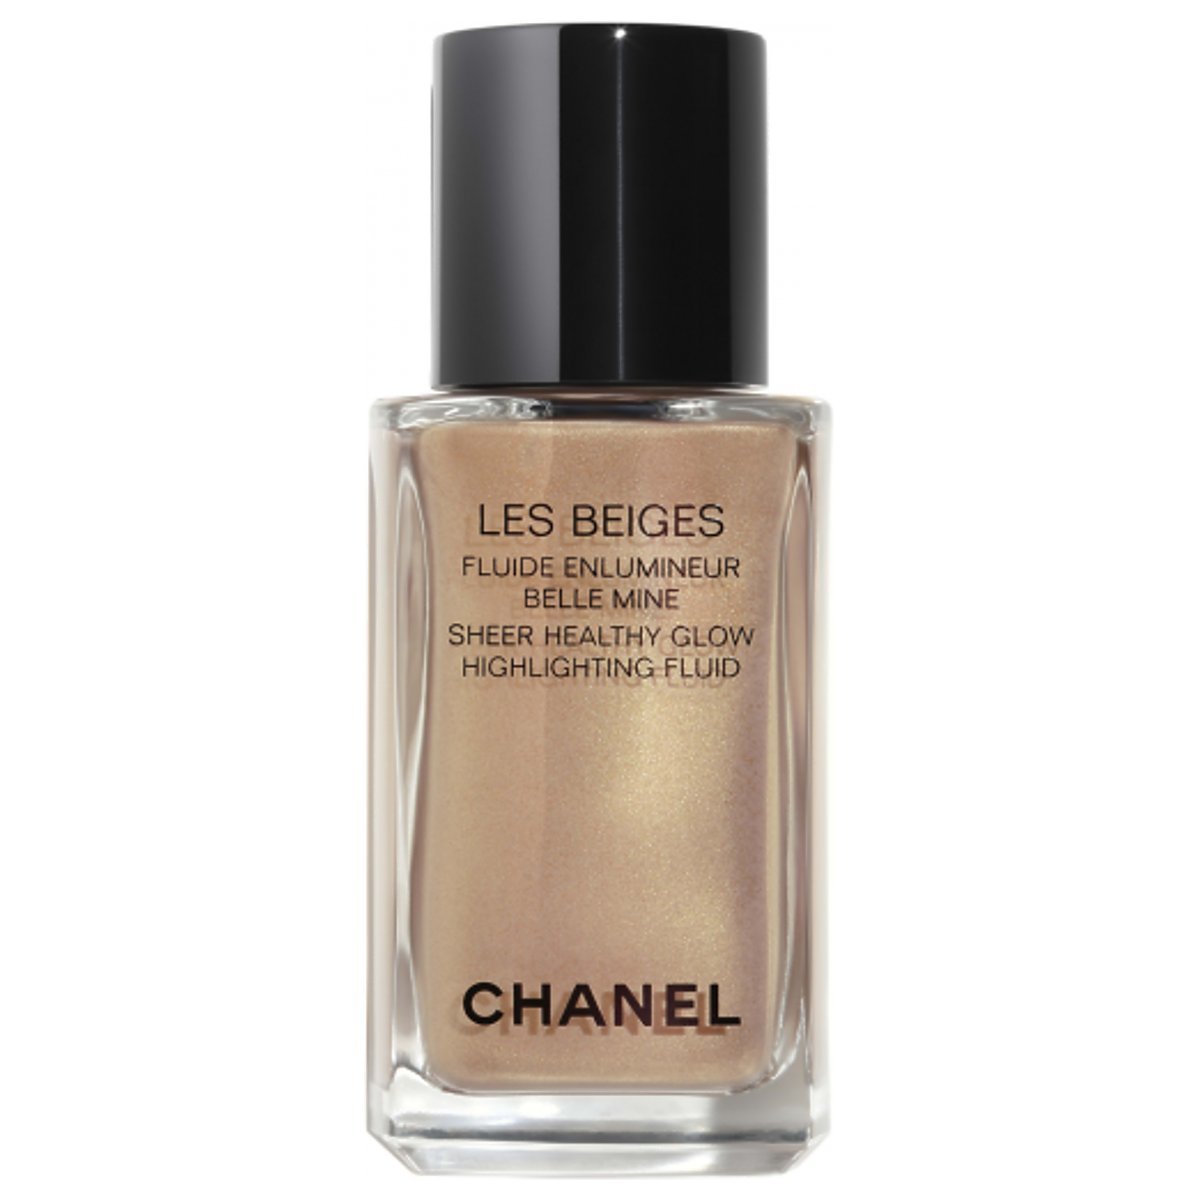 CHANEL Les Beiges Healthy Glow Sheer Highlighting Fluid